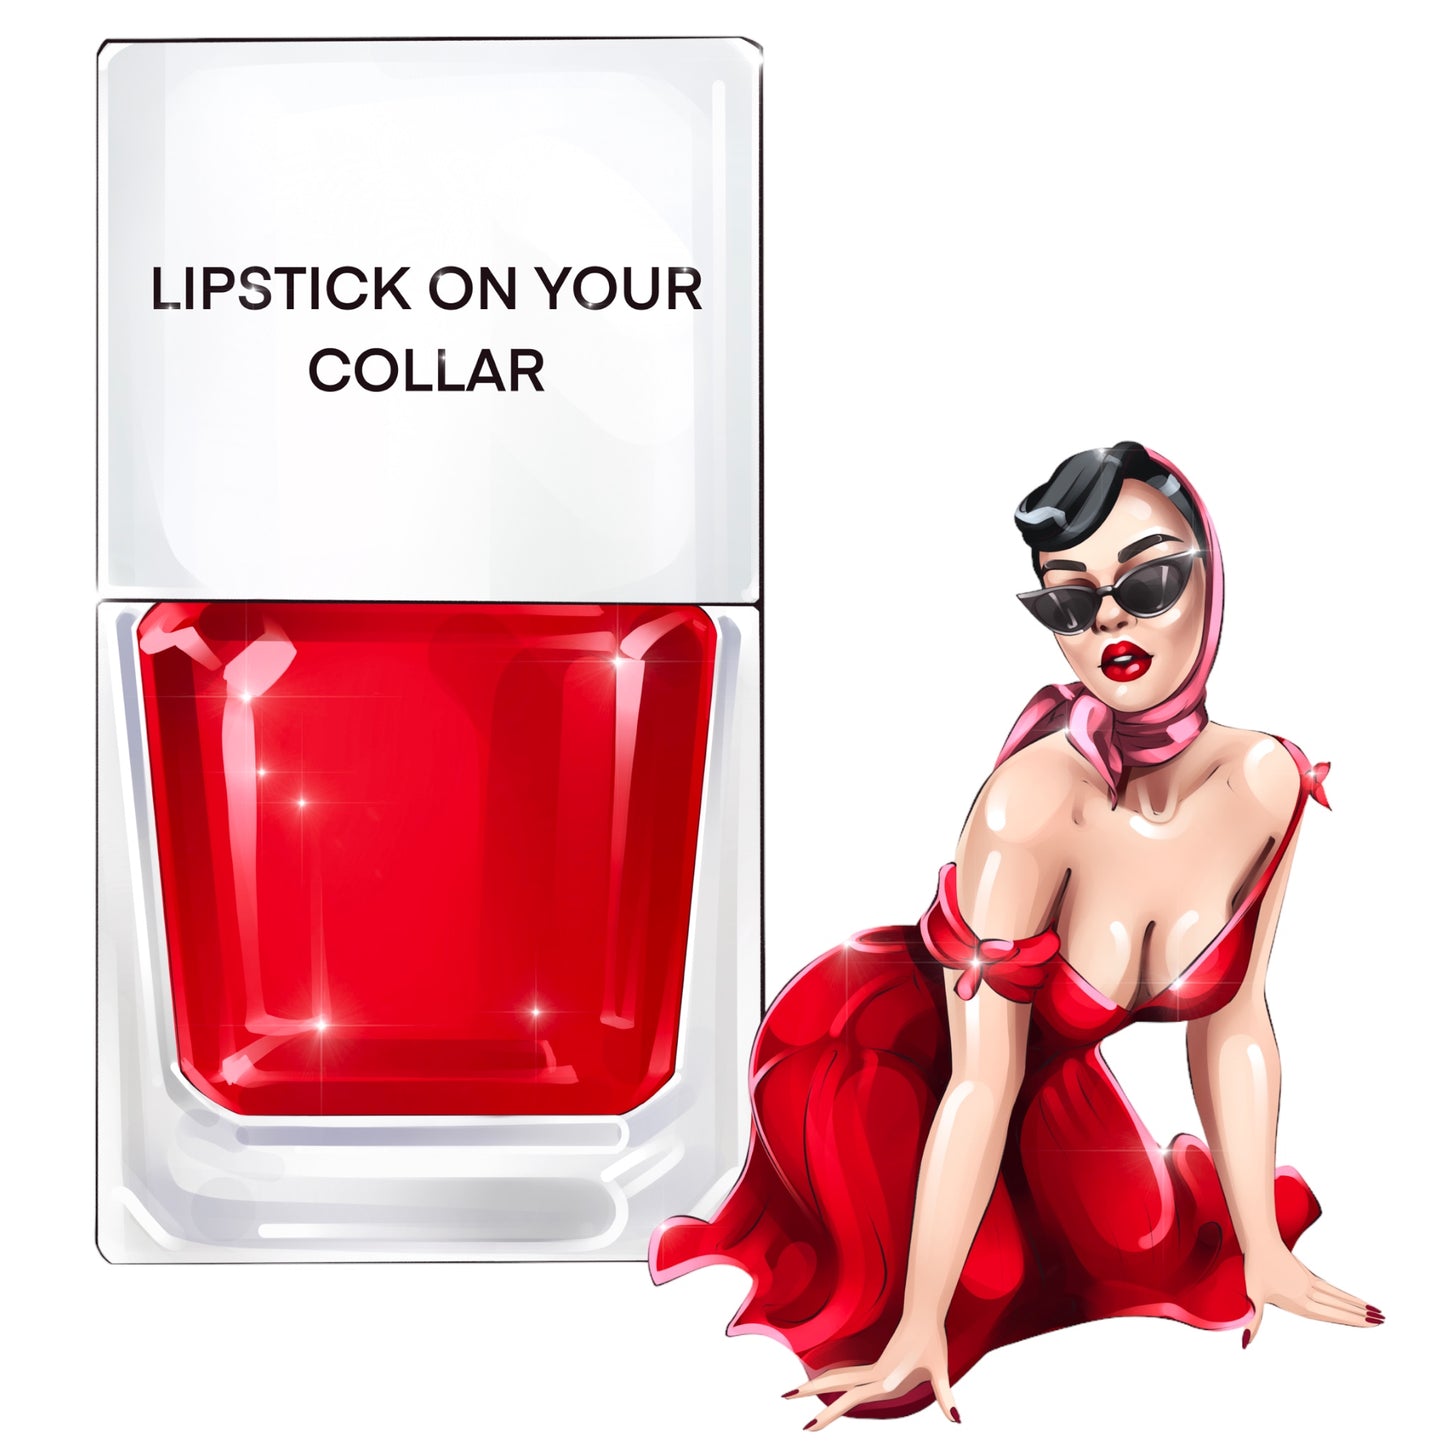 A True Nail Polish pinup for Lipstick On Your Collar , a bright red shade